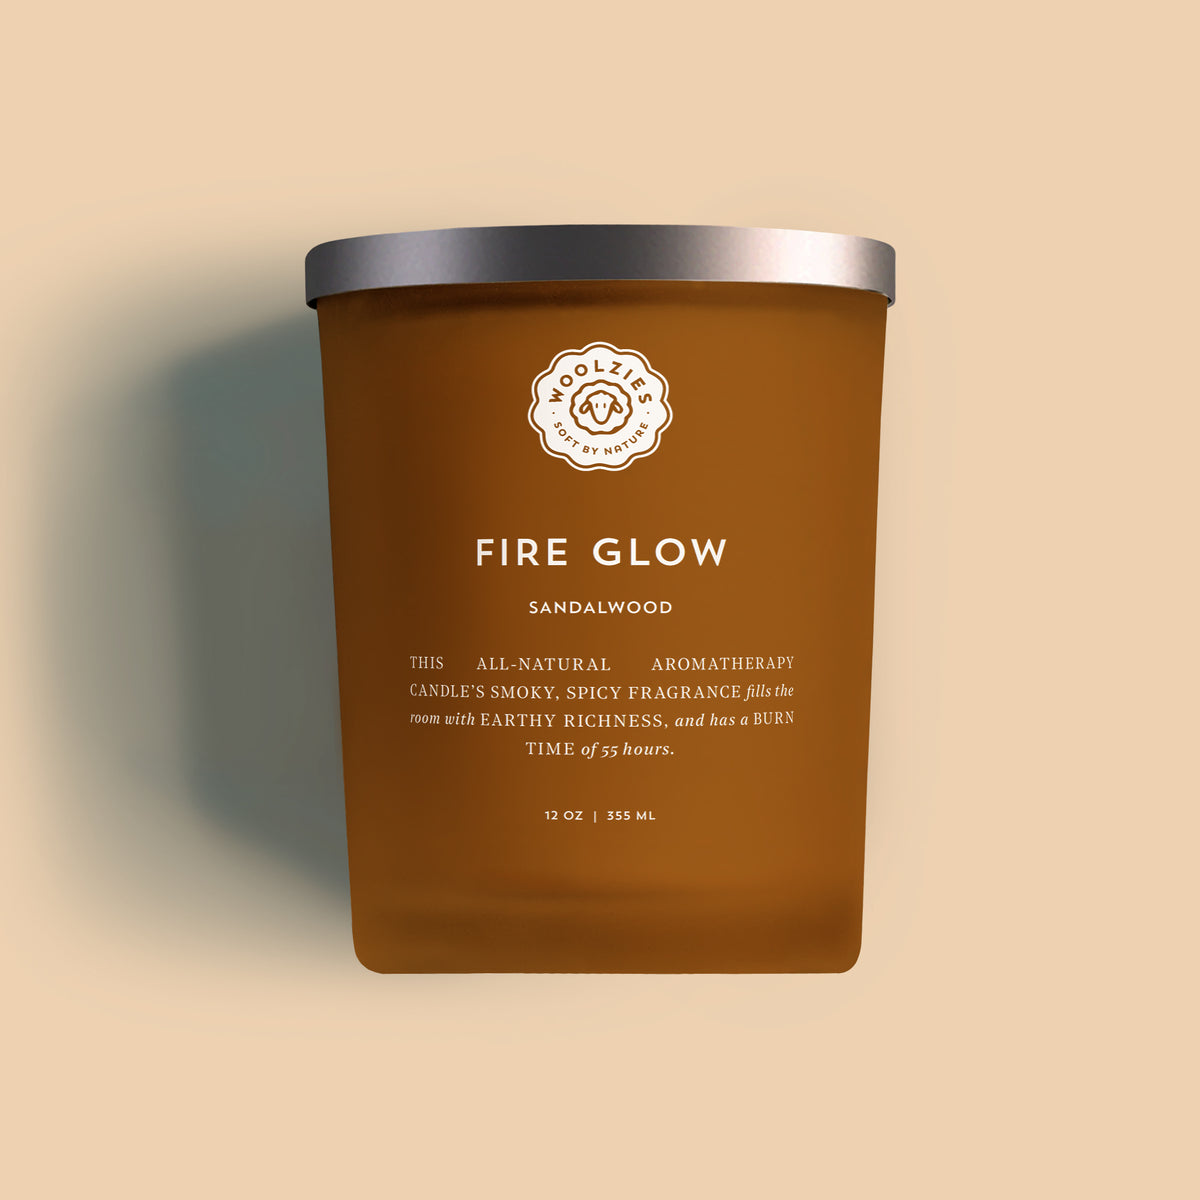 Unstoppable – Flame n' Glow Candle Co